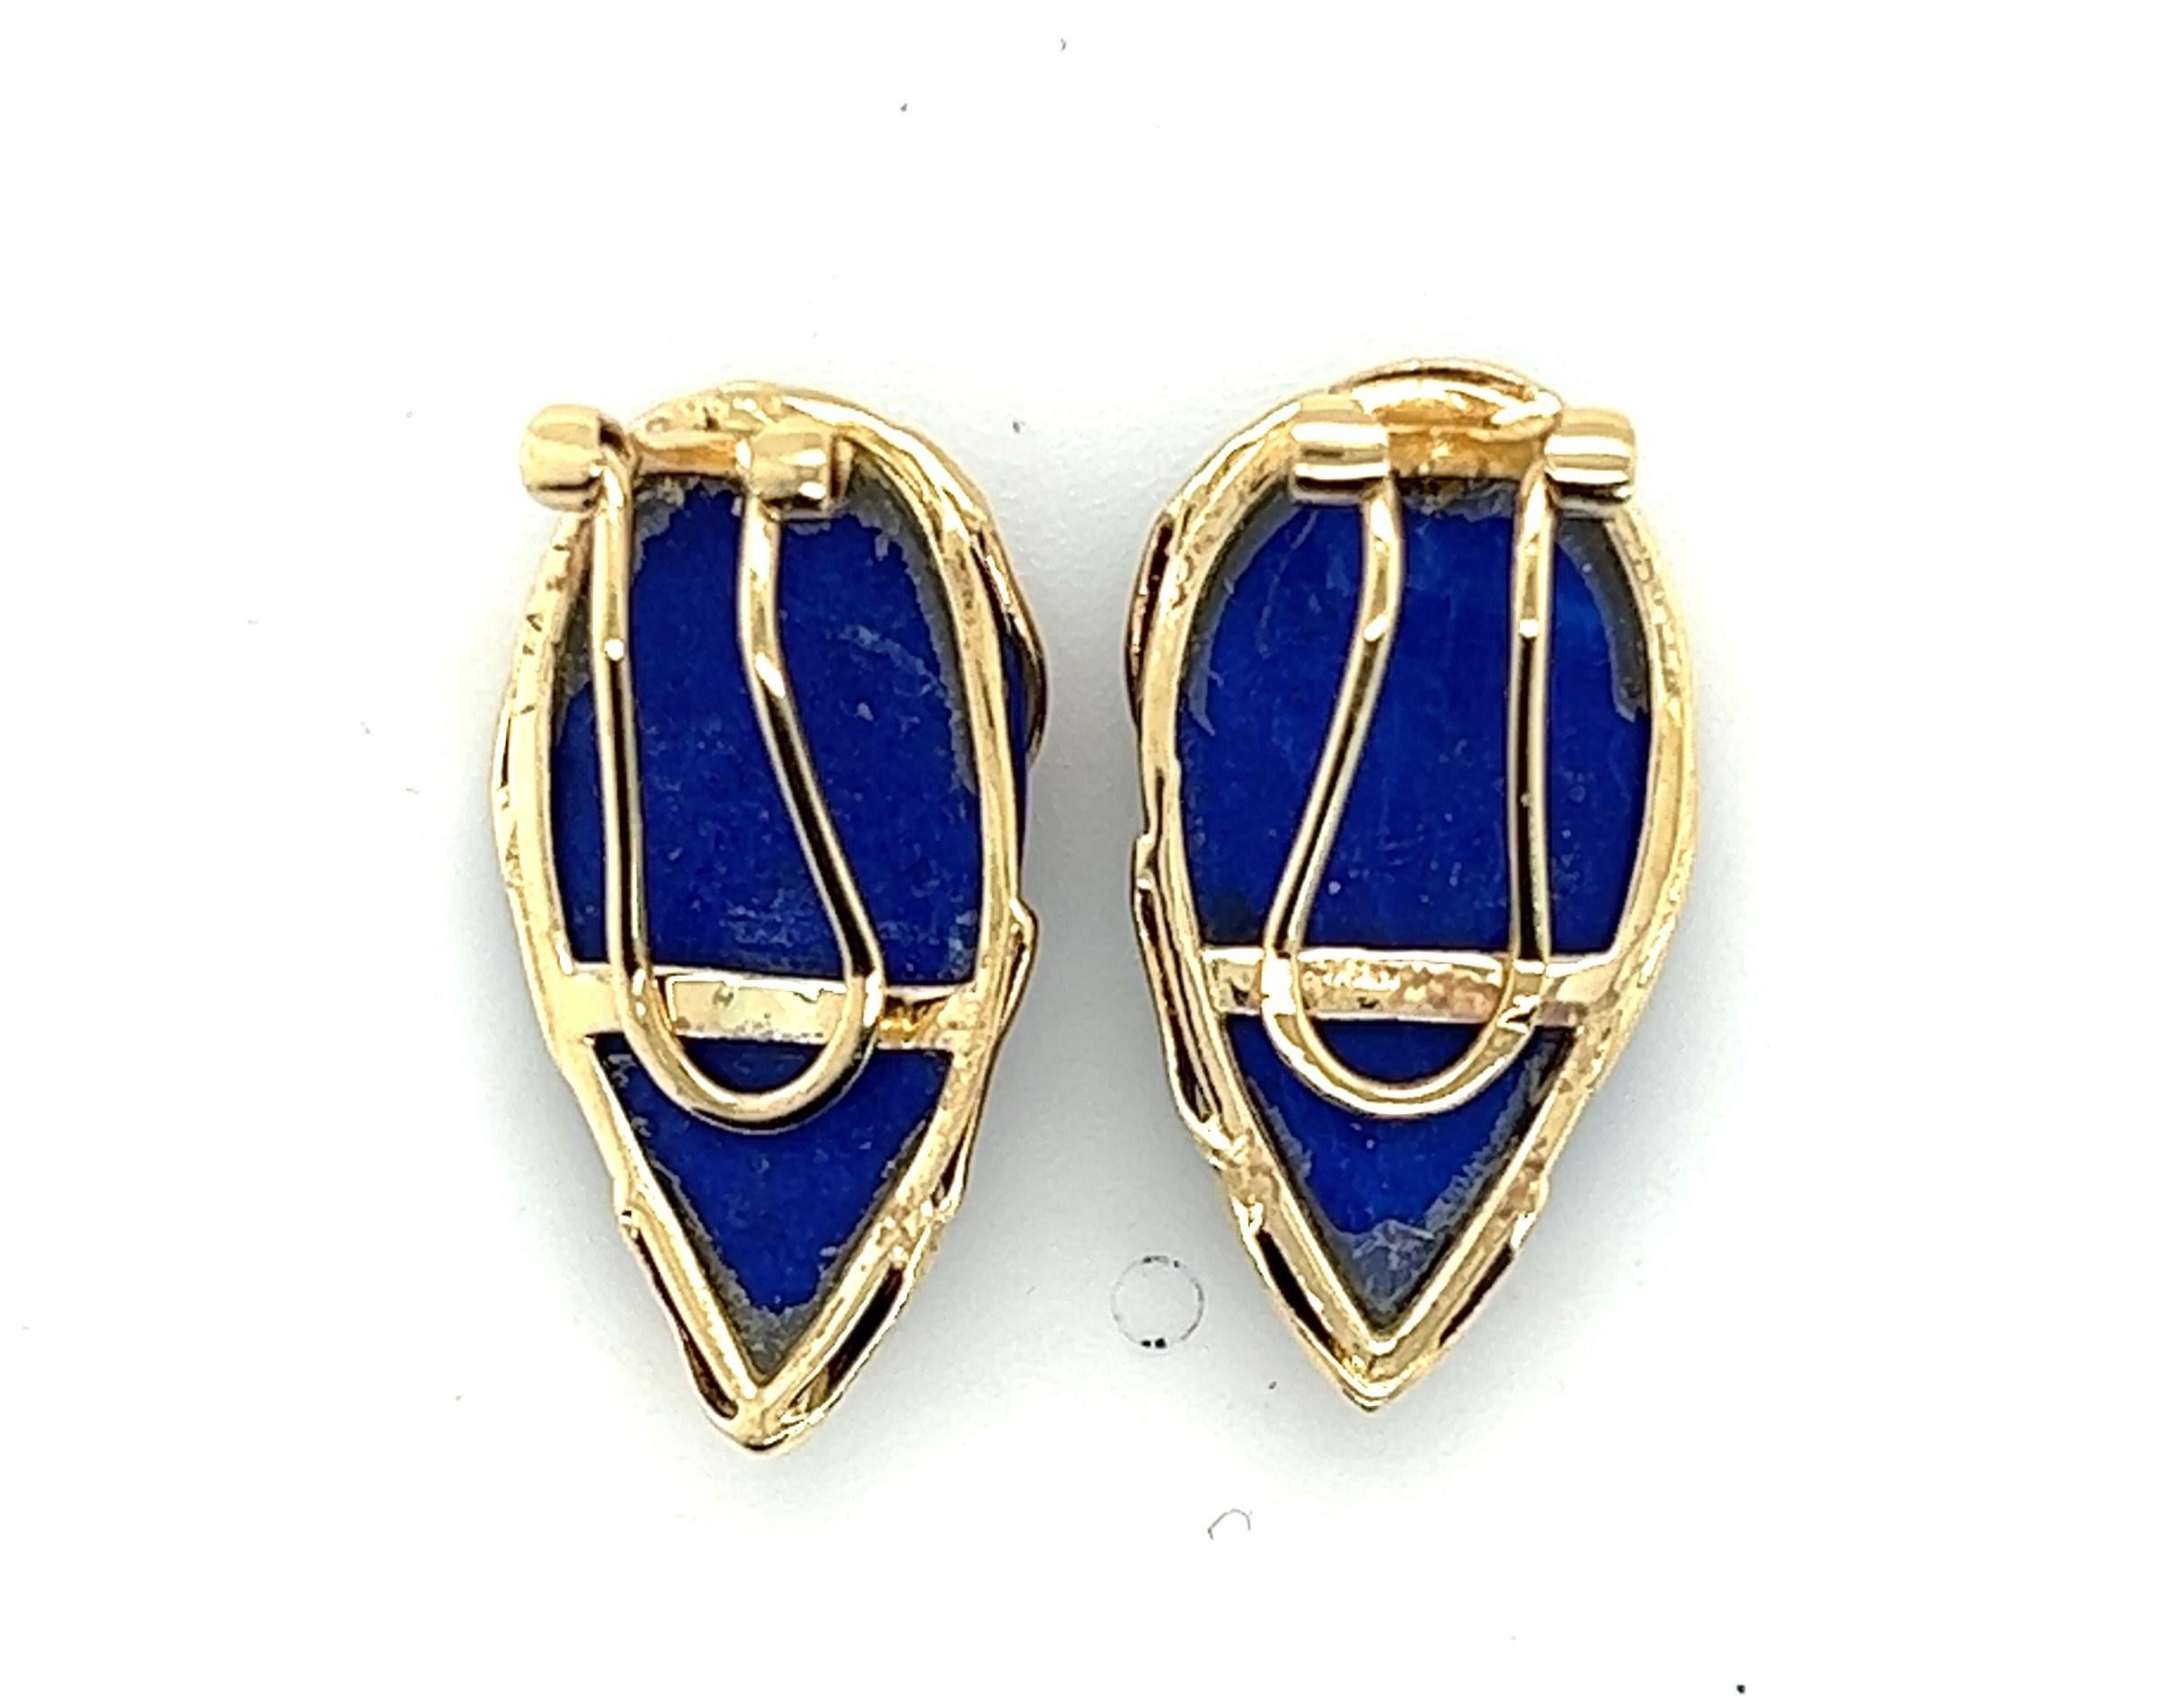 14kt yellow gold lapis lazuli earrings cut to pear shaped cabochons. The earrings wrap gold around the front of the stones for a sleek and refined look (and to add to the sparkle of the gold colored flecks in the lapis). These clip on earrings have